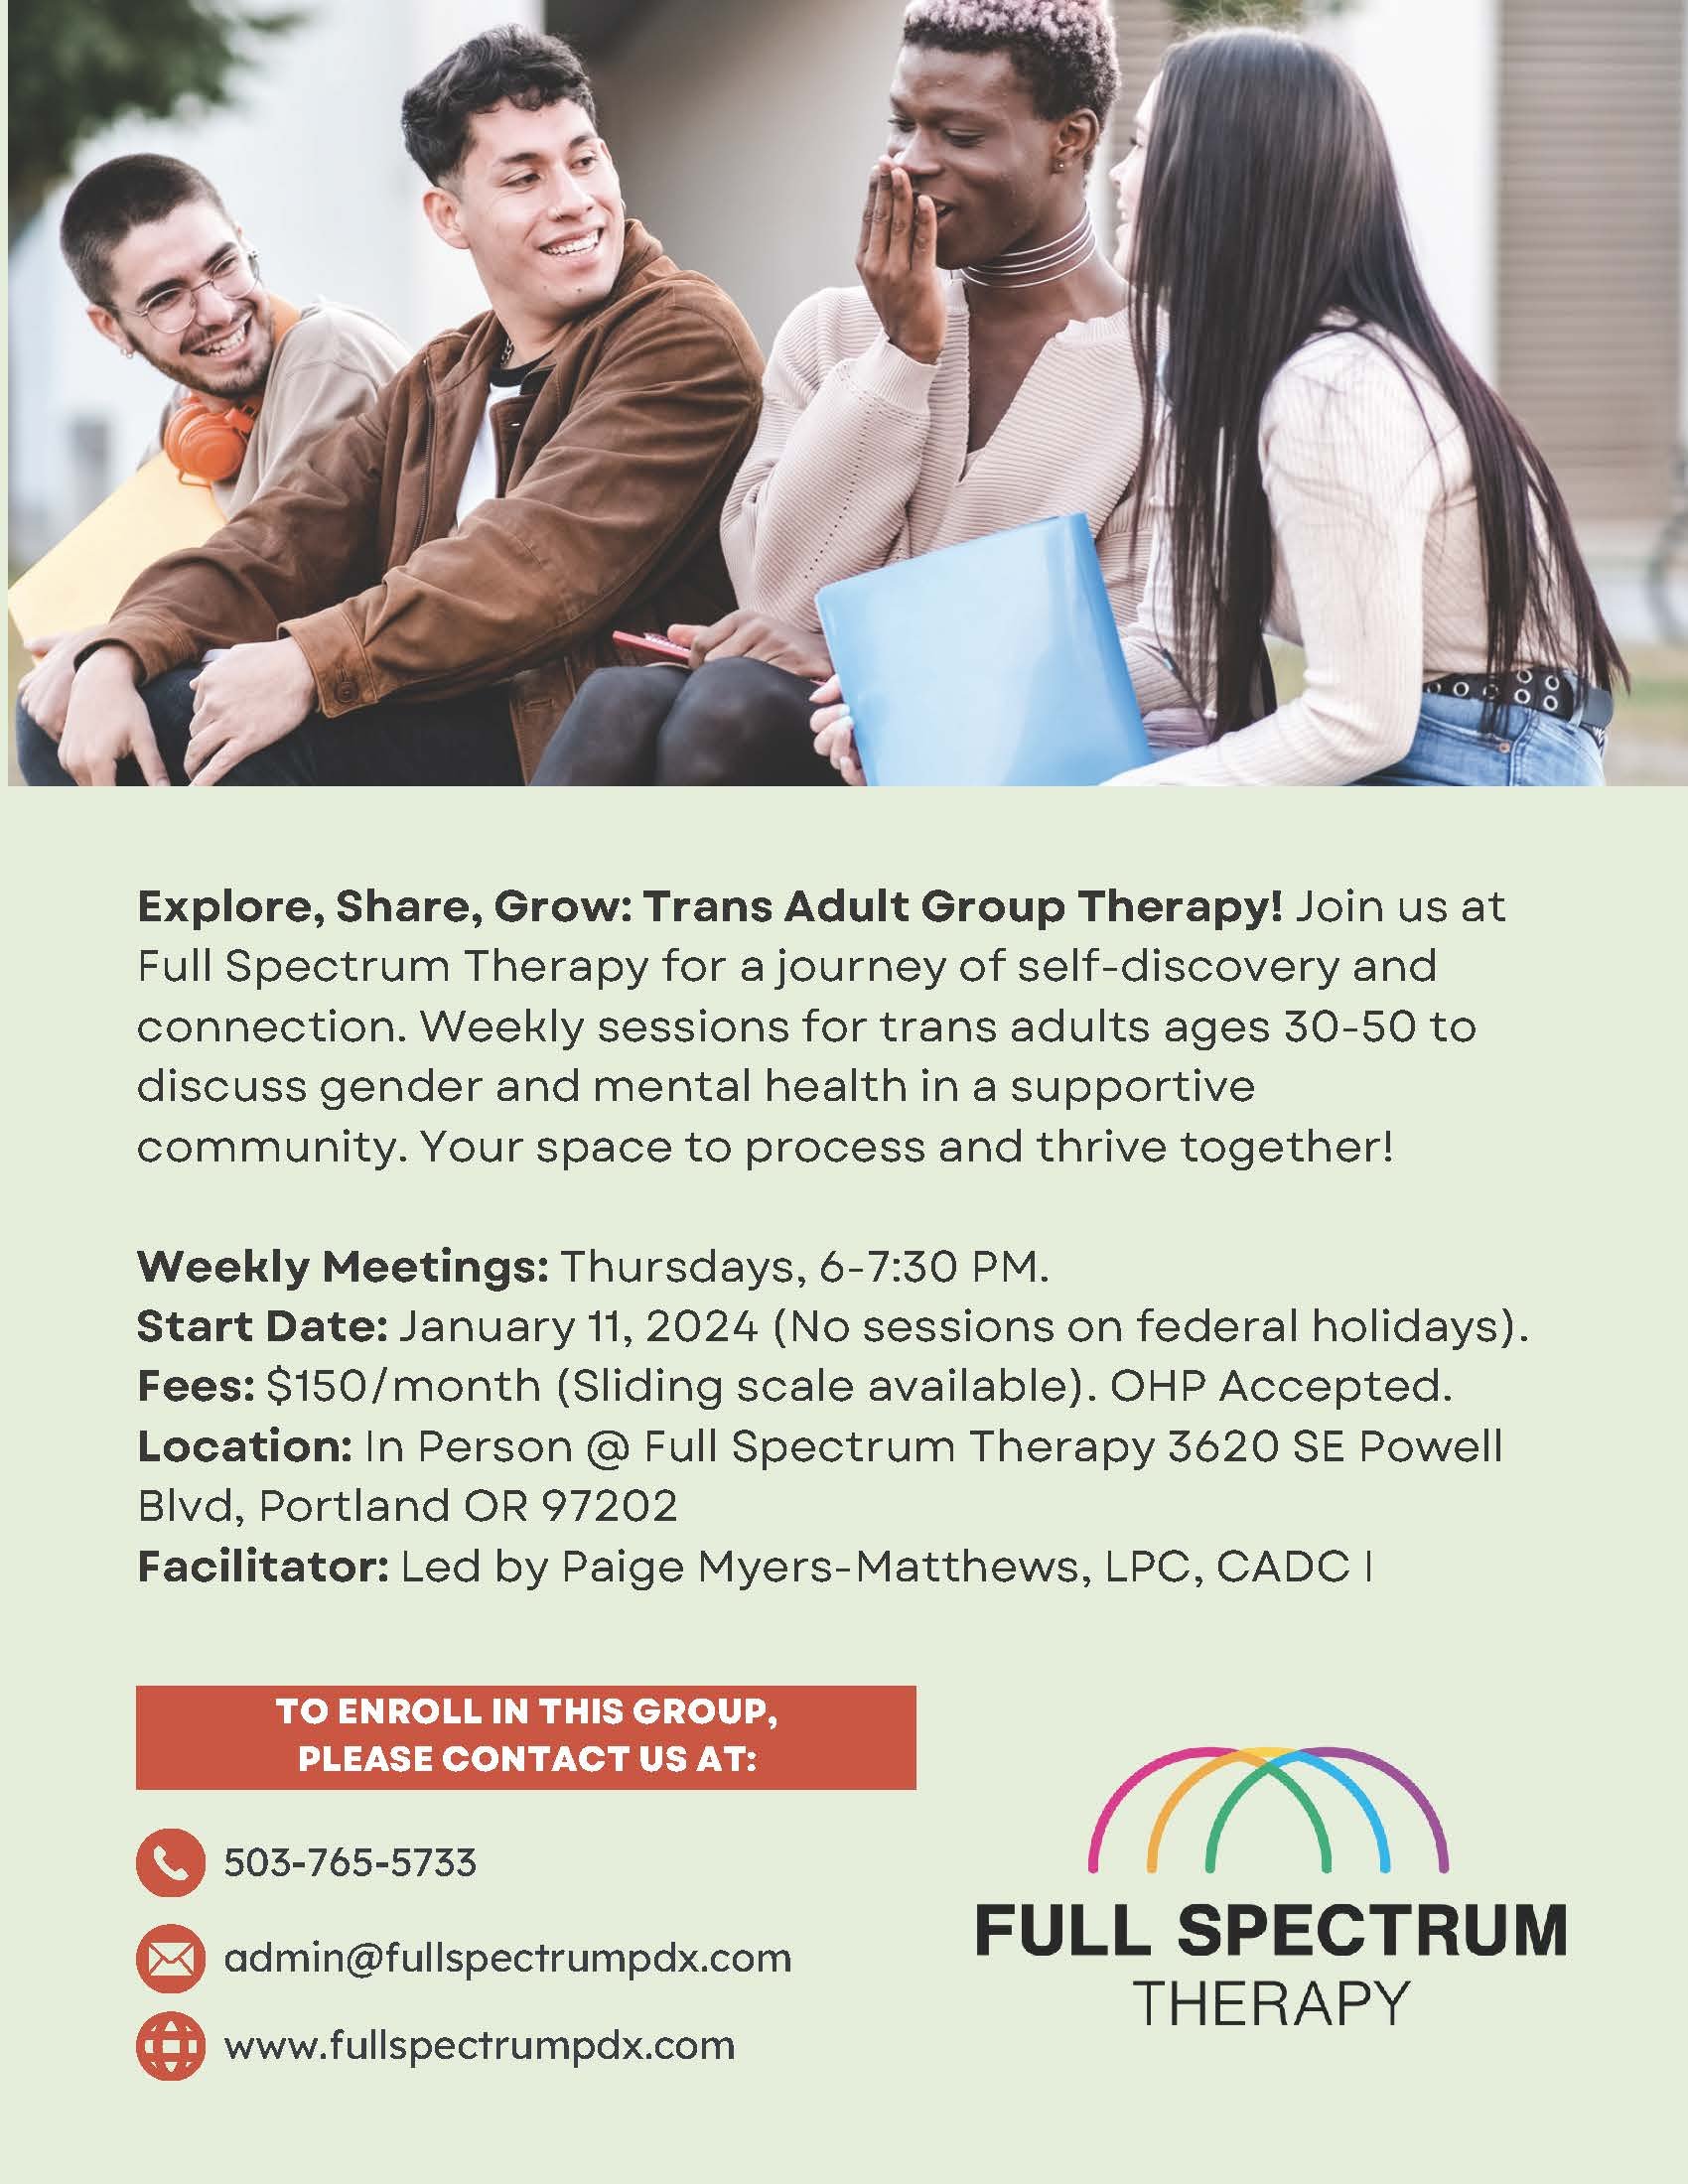 Explore, Share, Grow Trans Adult Group Therapy Flyer (1).jpg